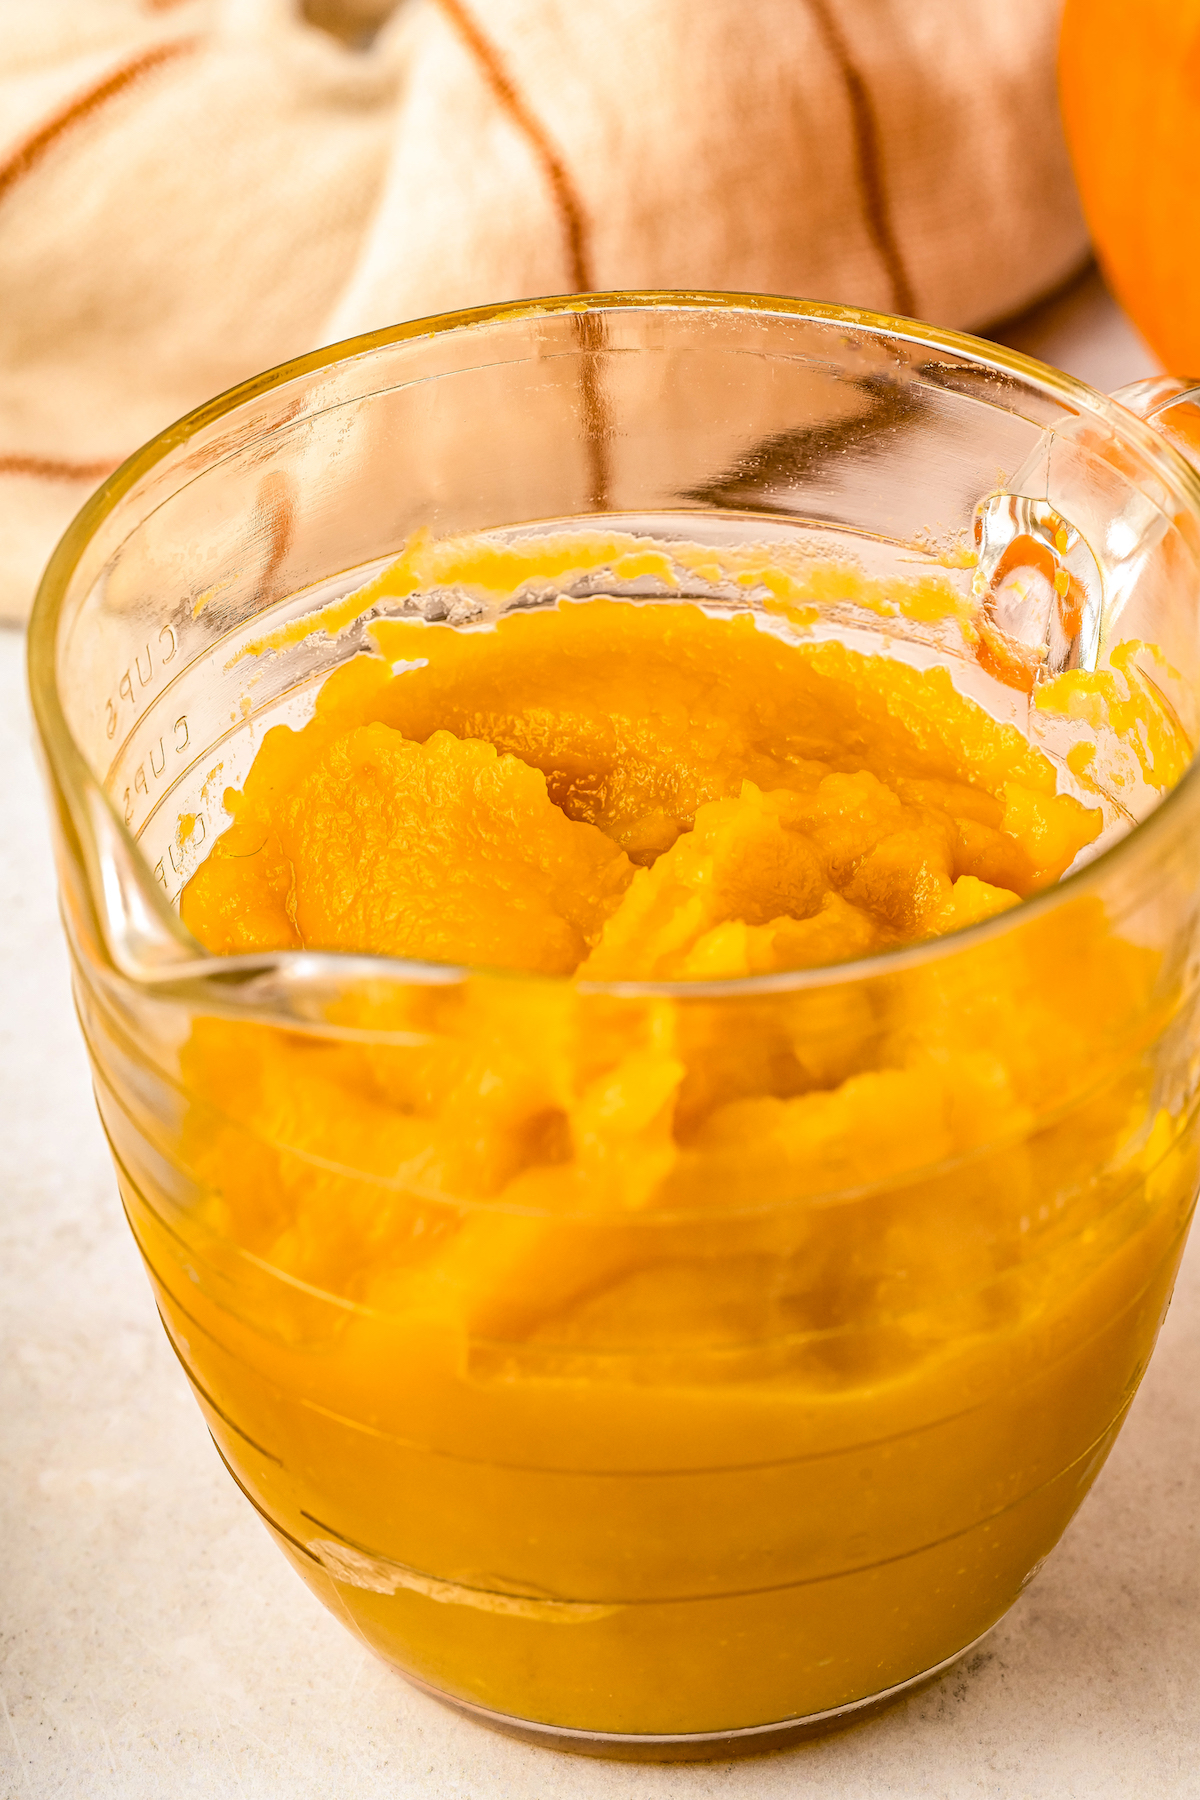 A glass measuring cup of pumpkin puree.